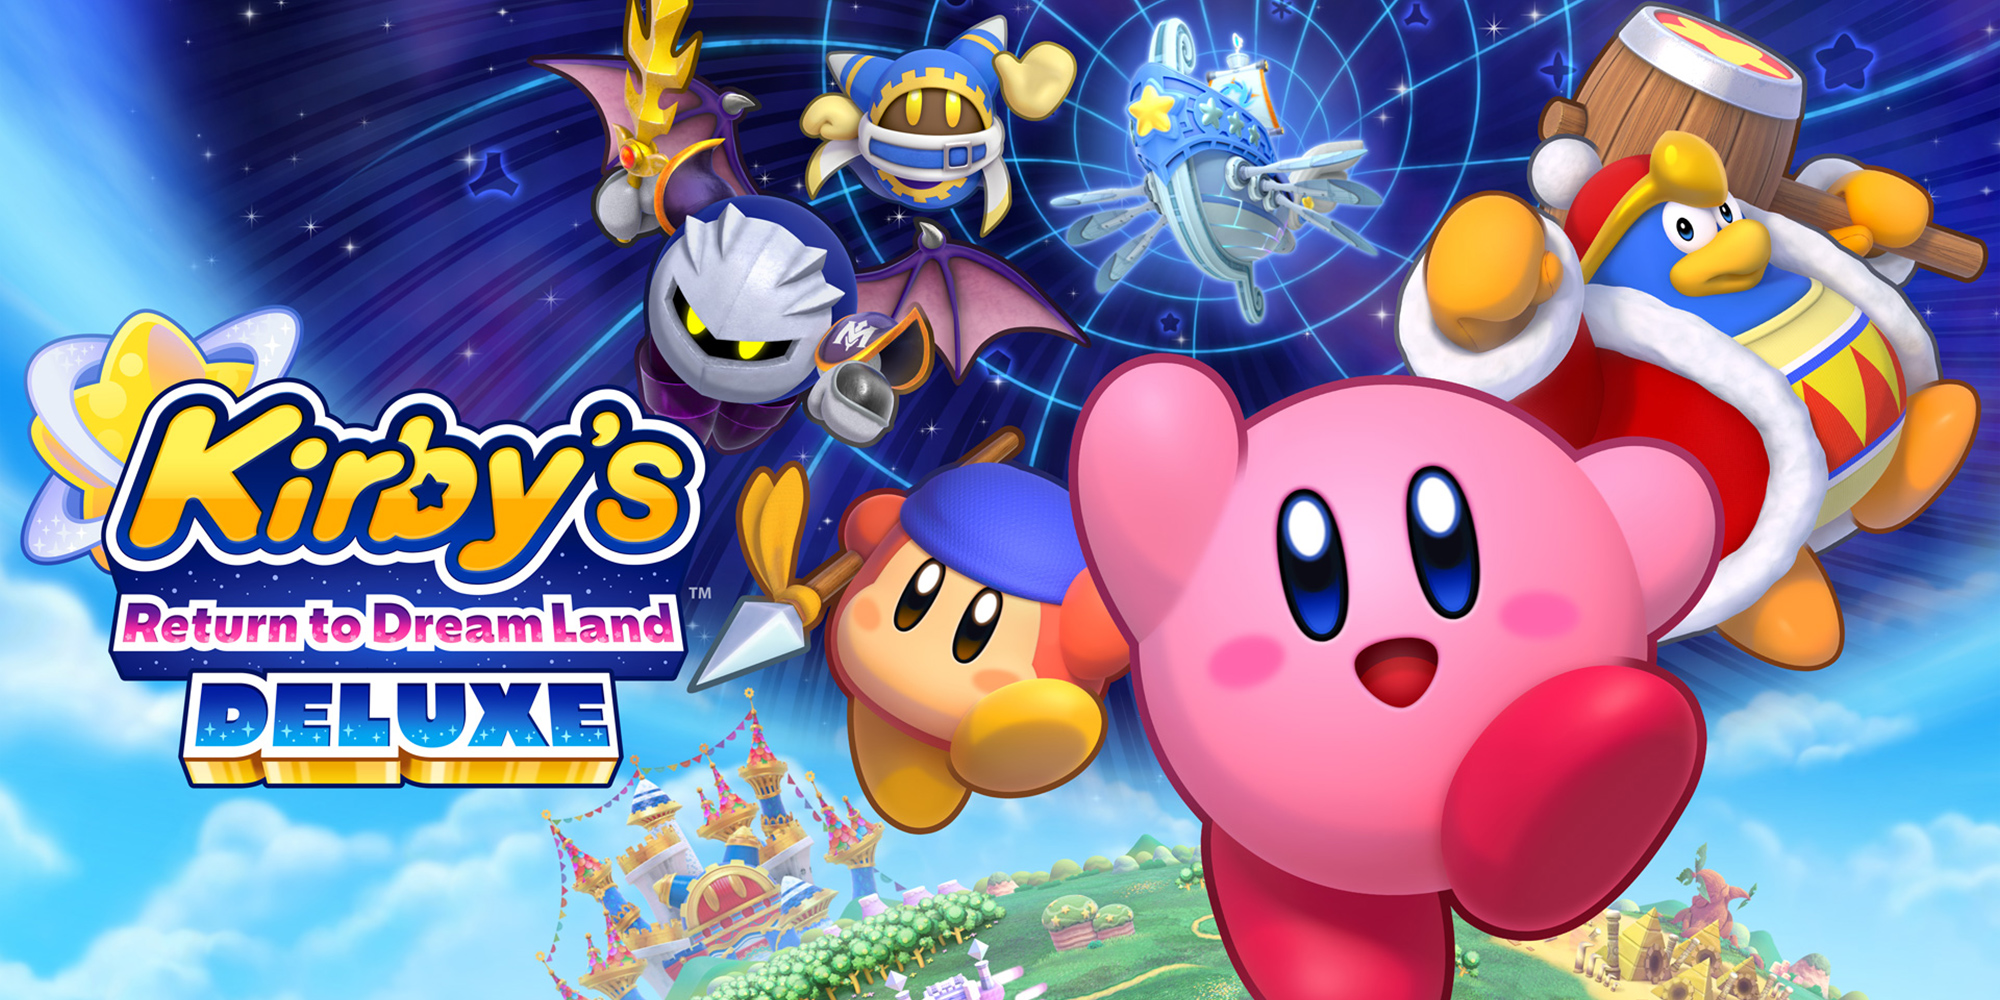 Kirby's Return to Dream Land Deluxe. Nintendo Switch games